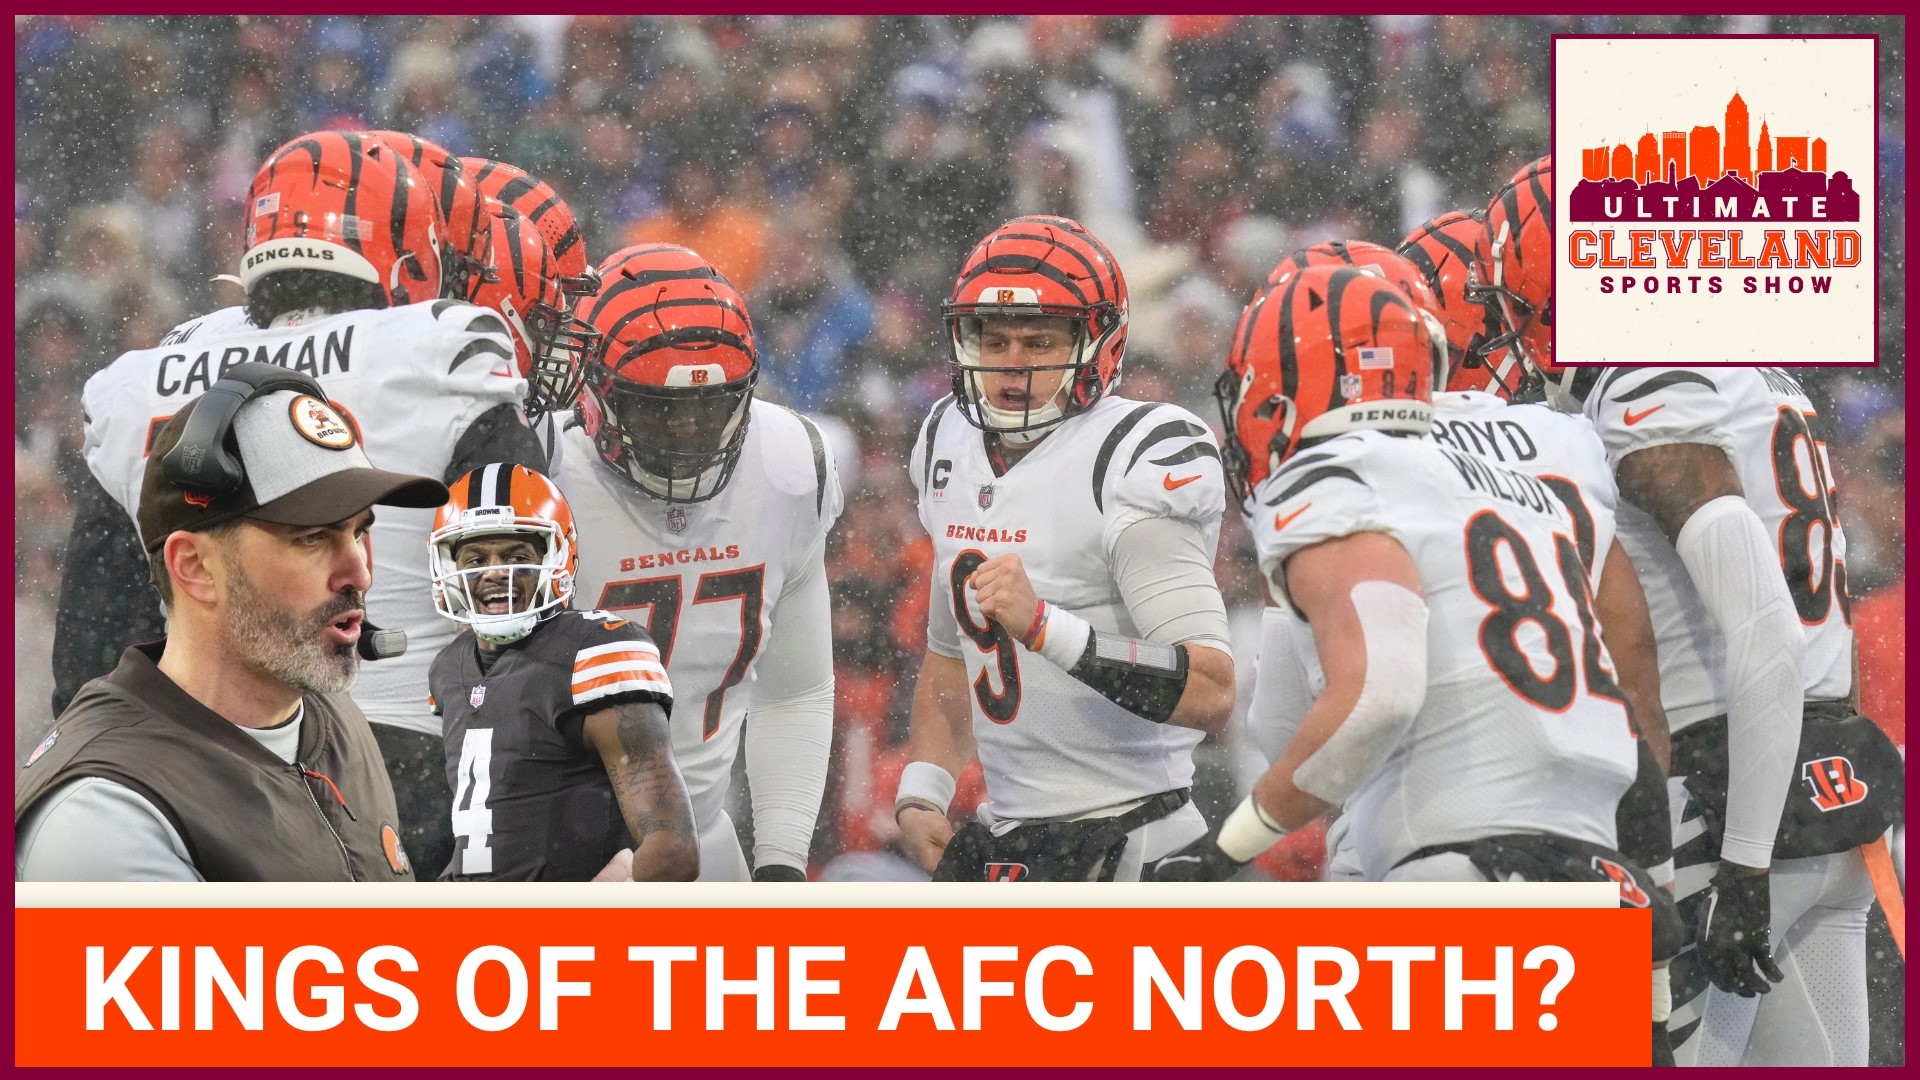 Joe Burrow & the Cincinnati Bengals are headed to the AFC Championship game for the second time in as many years, and are widening the gap between them and the rest.